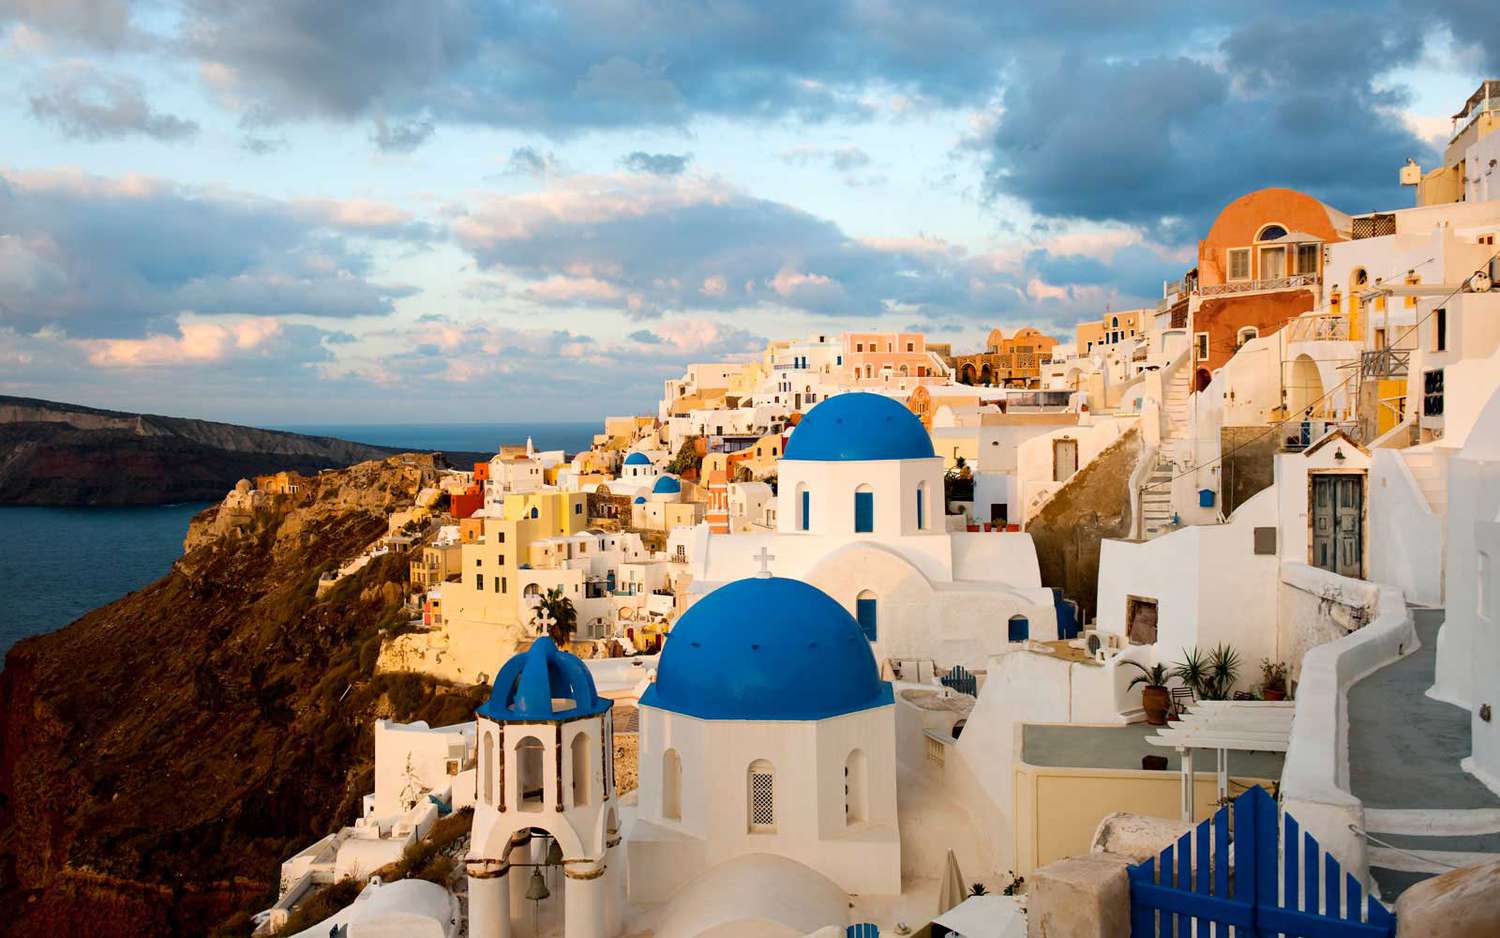 What is the capital of Santorini?